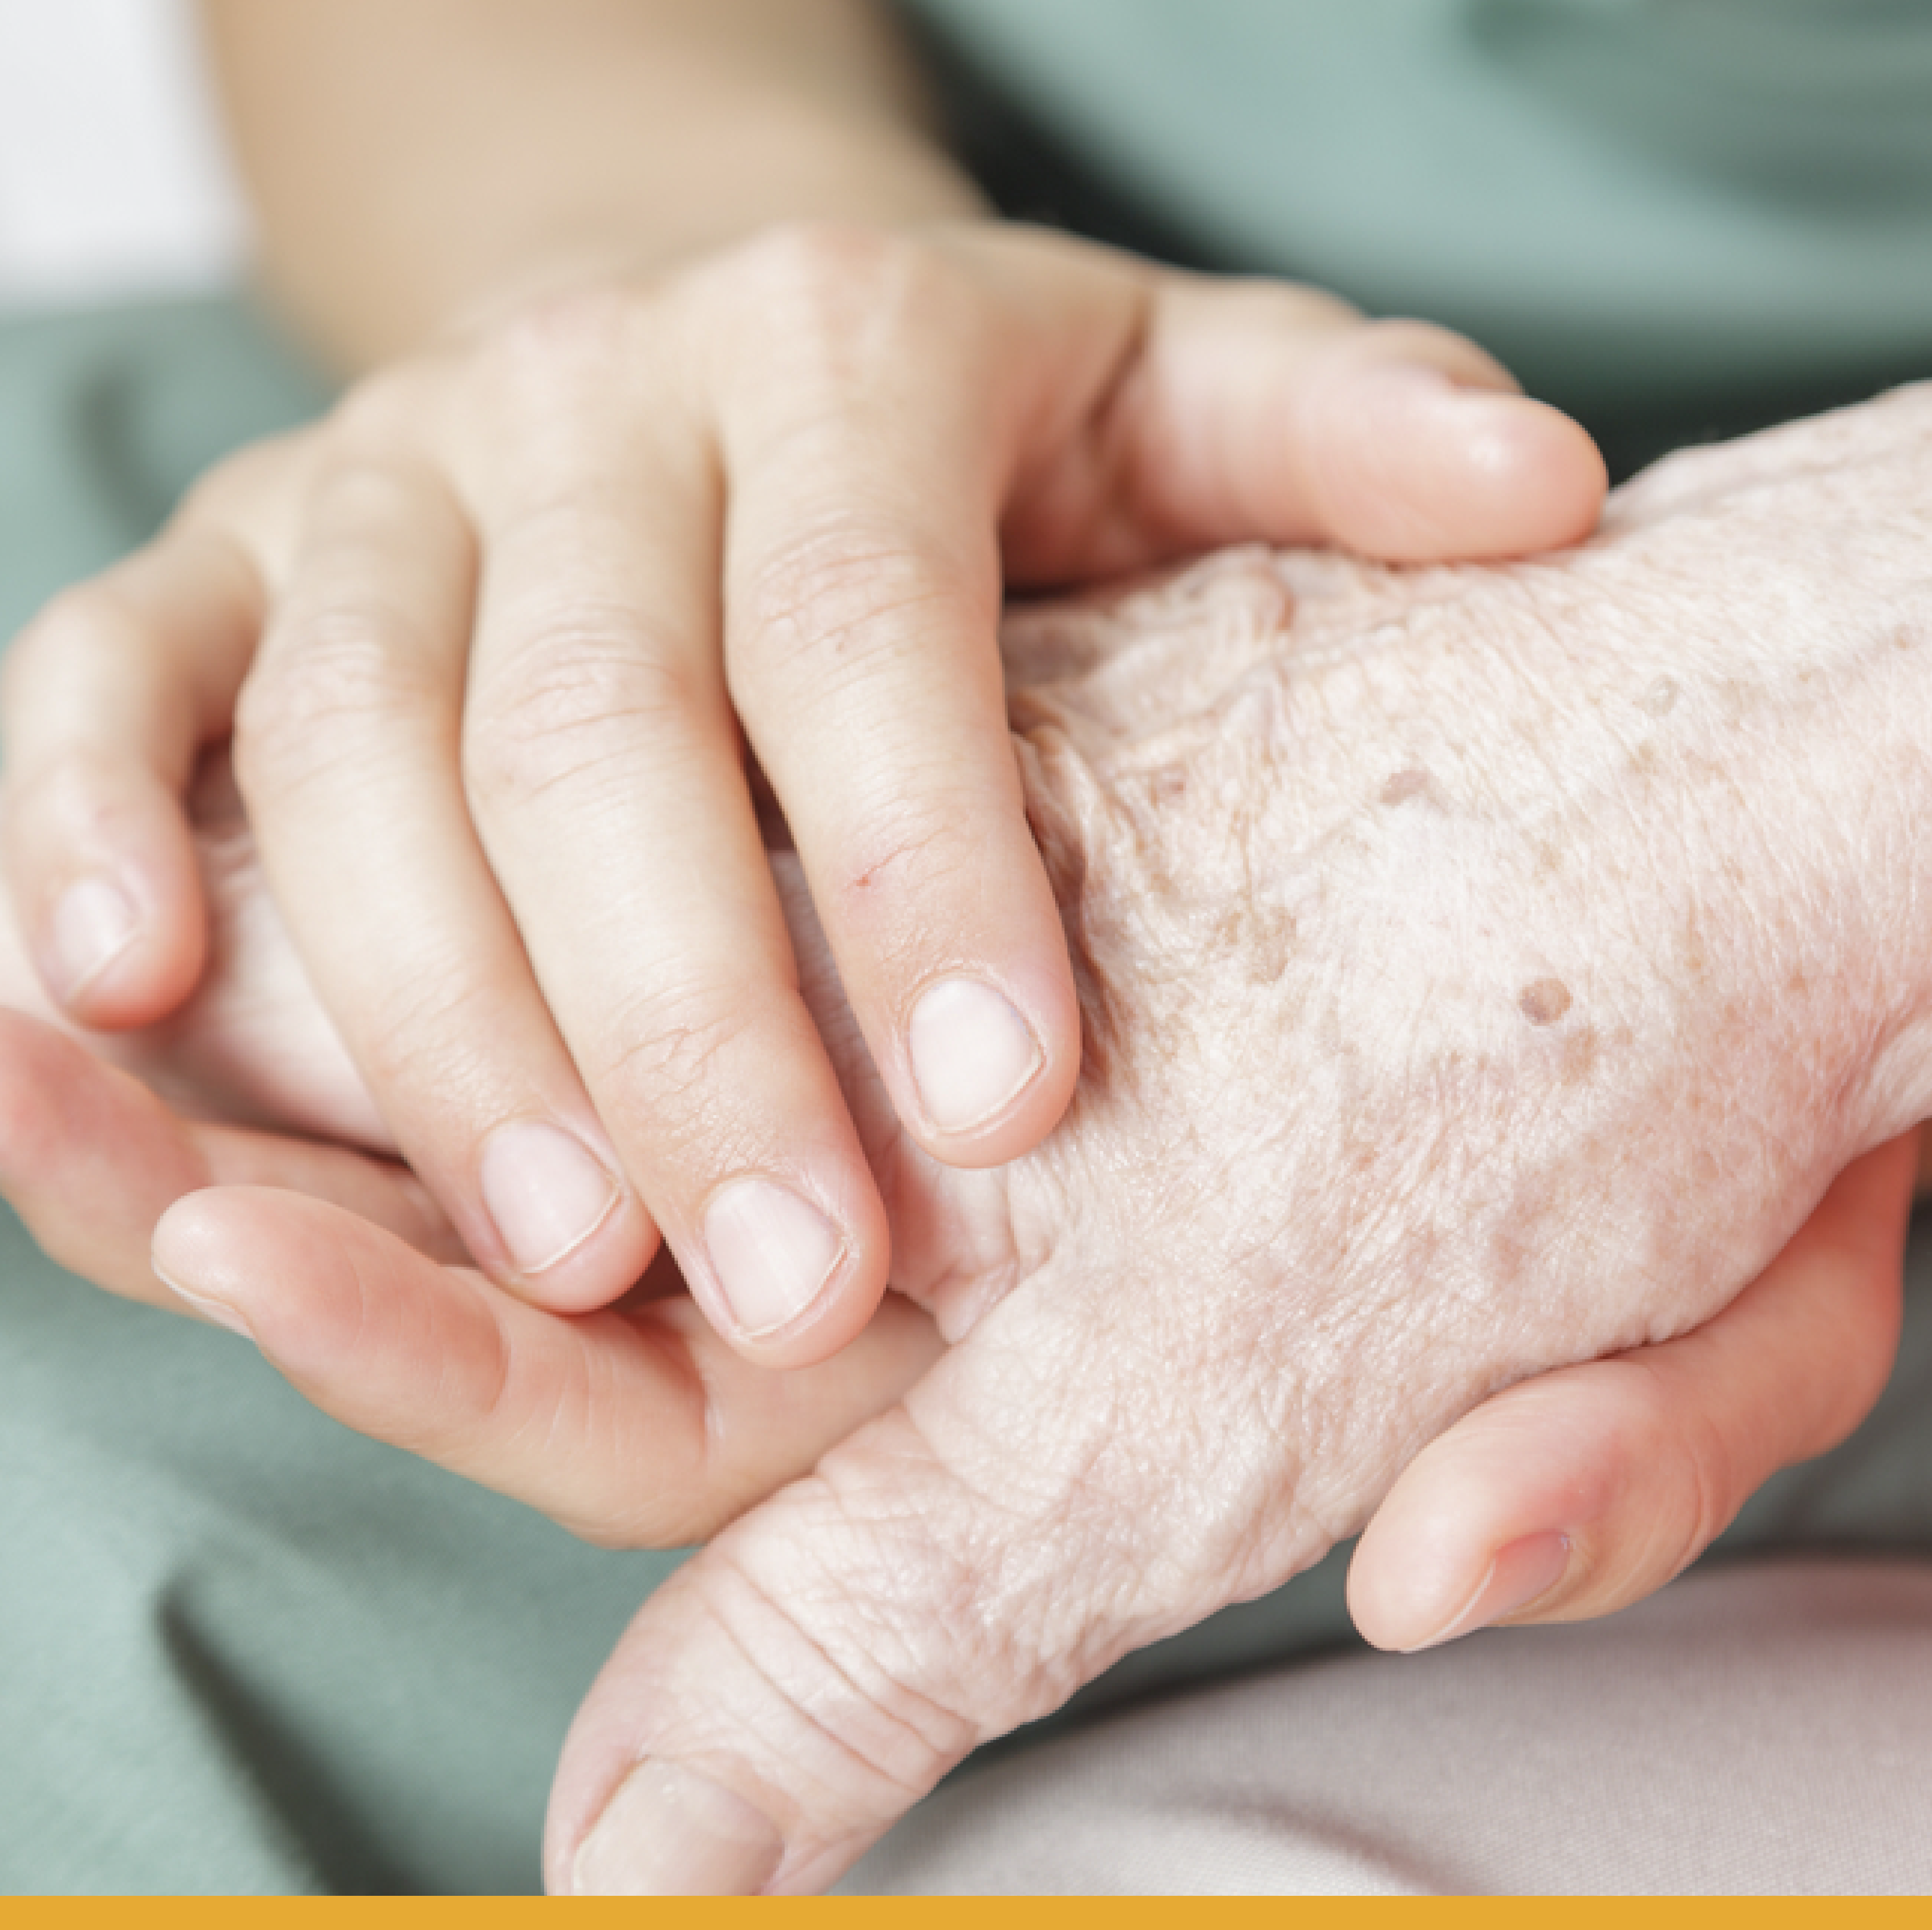 Elderly person holding a young person's hand